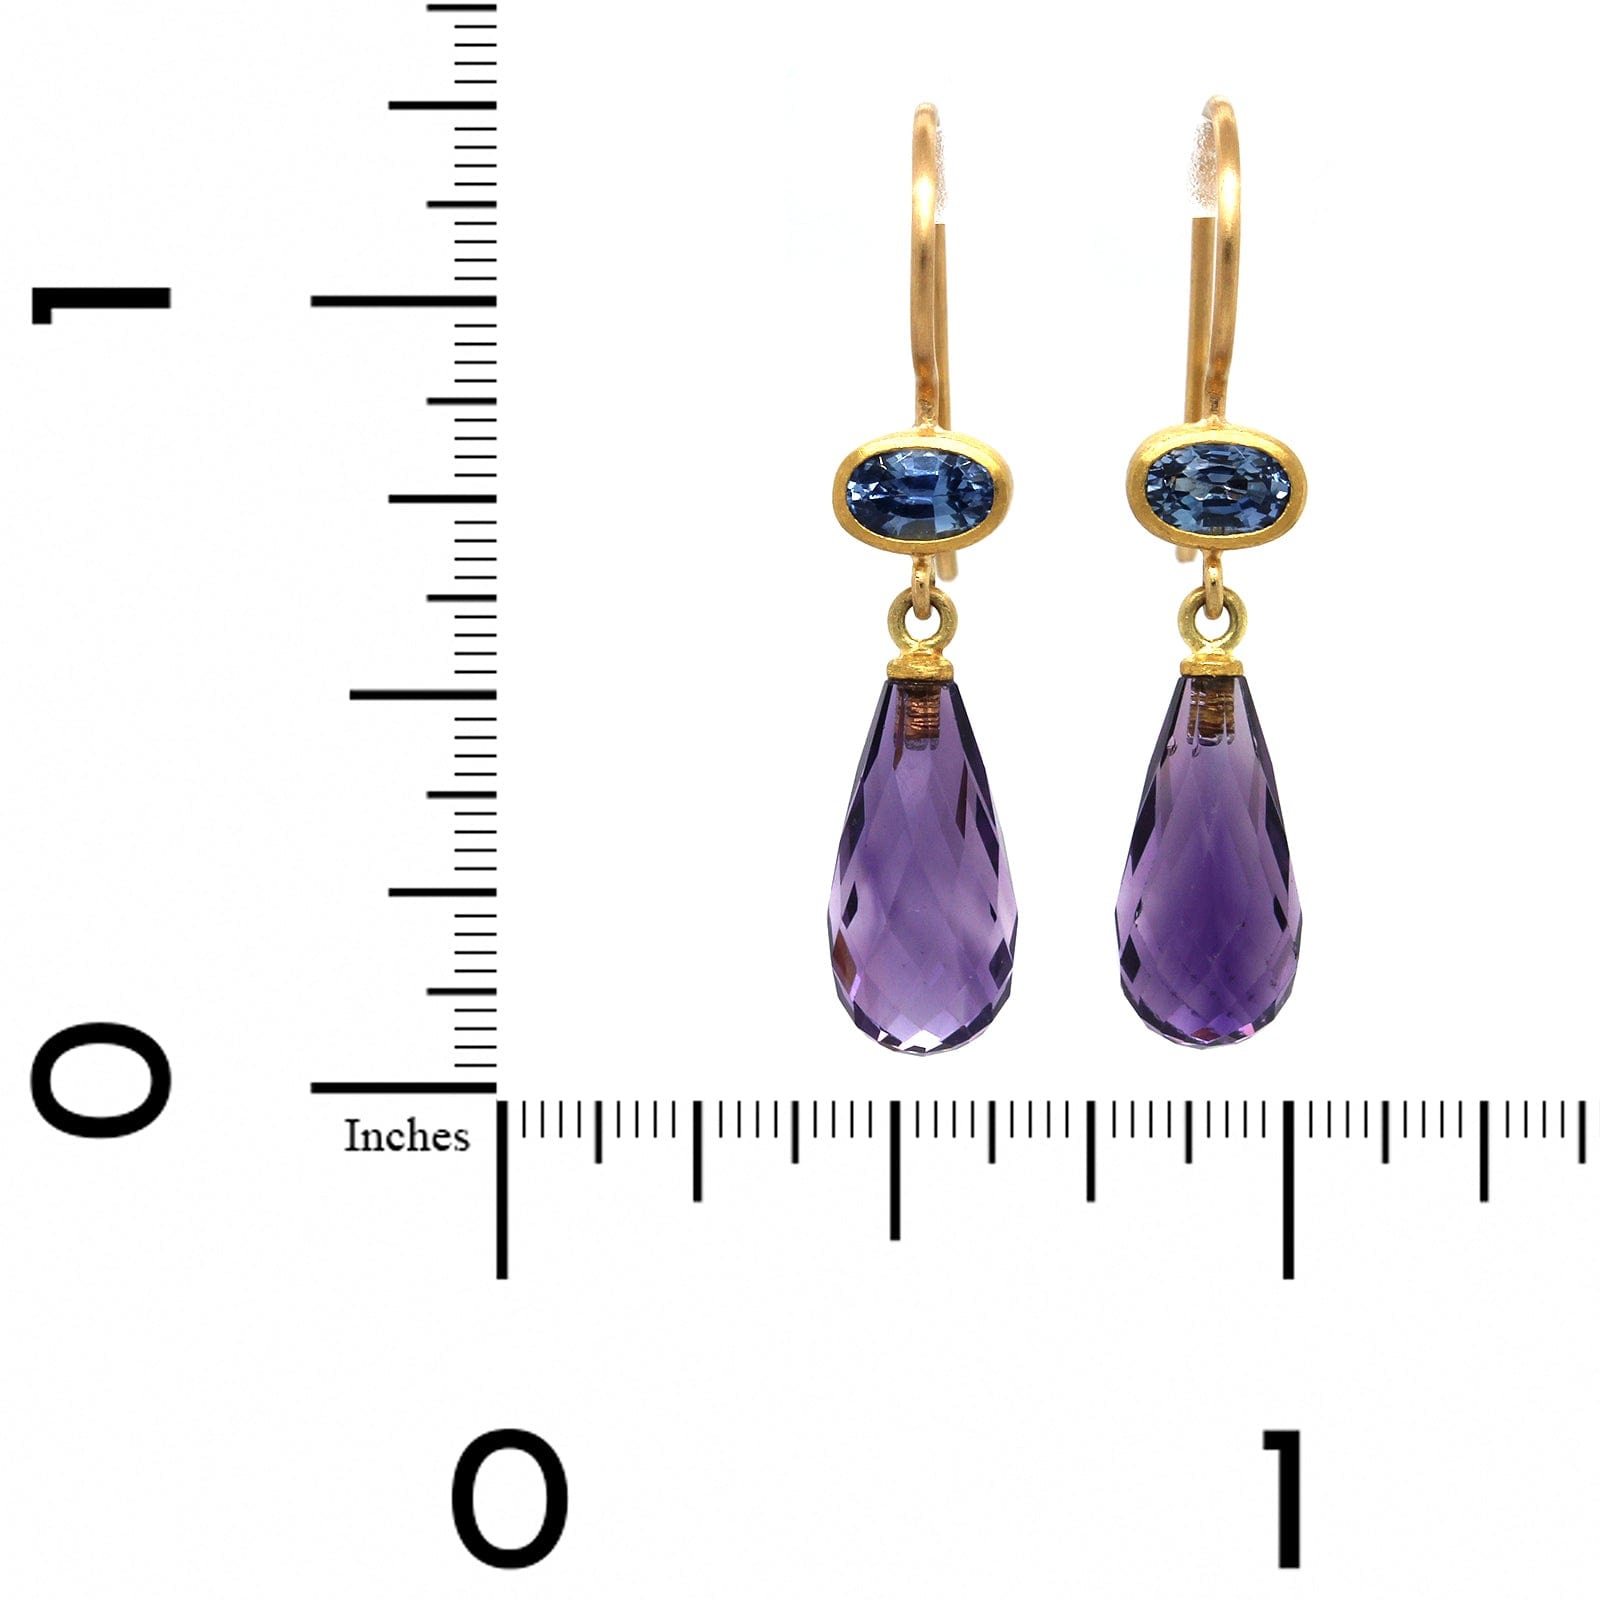 Mallary Marks 22K and 18K Yellow Gold Amethyst and Sapphire Drop Earrings